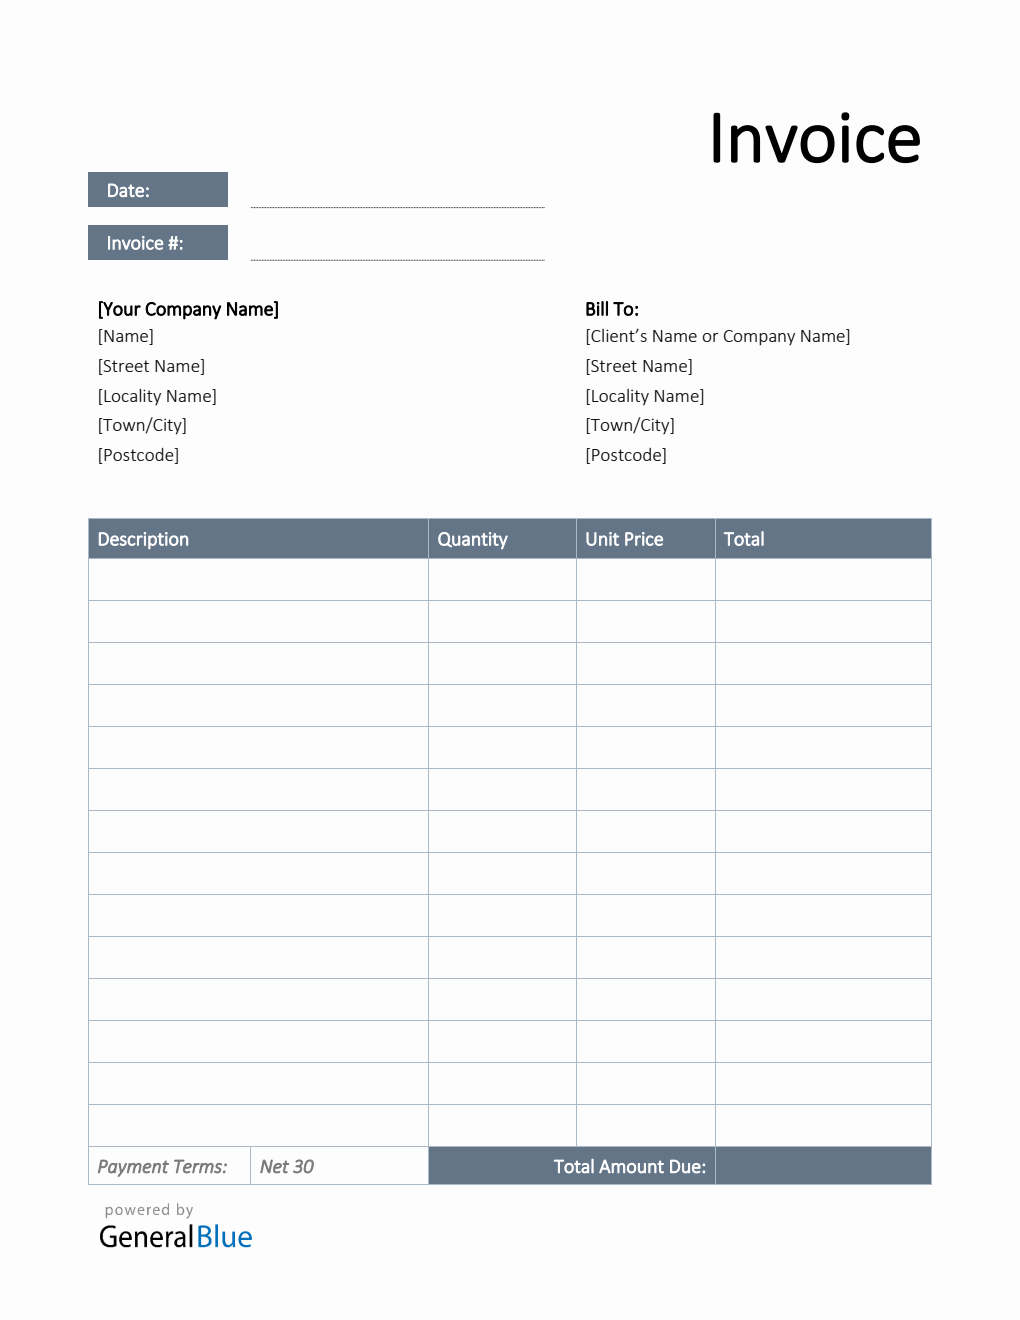 Invoice Template for U.K. in Word (Simple)